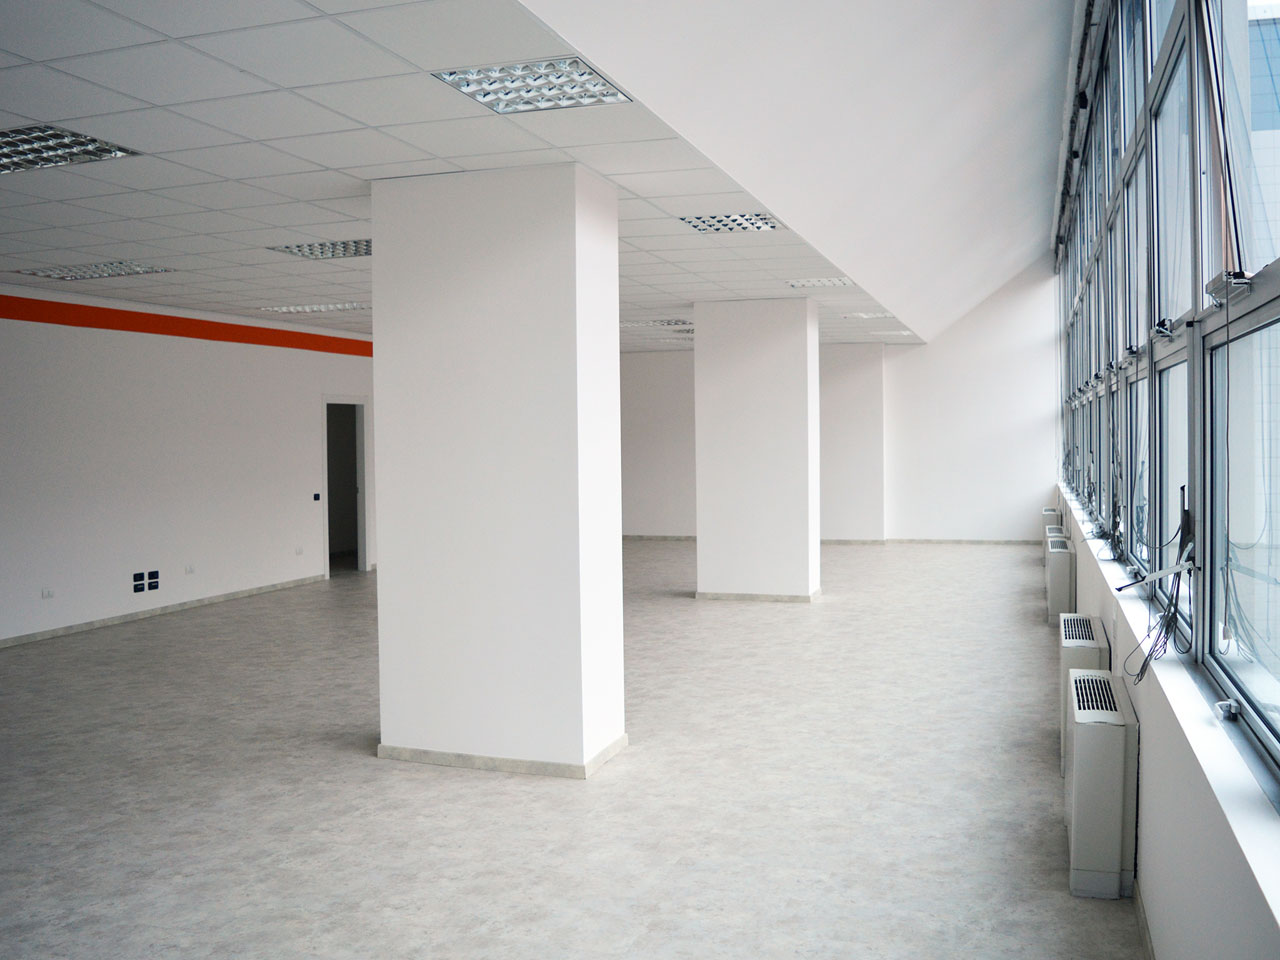 Open space east side - Office for rent in Milan 750 mq (8073 sqft)